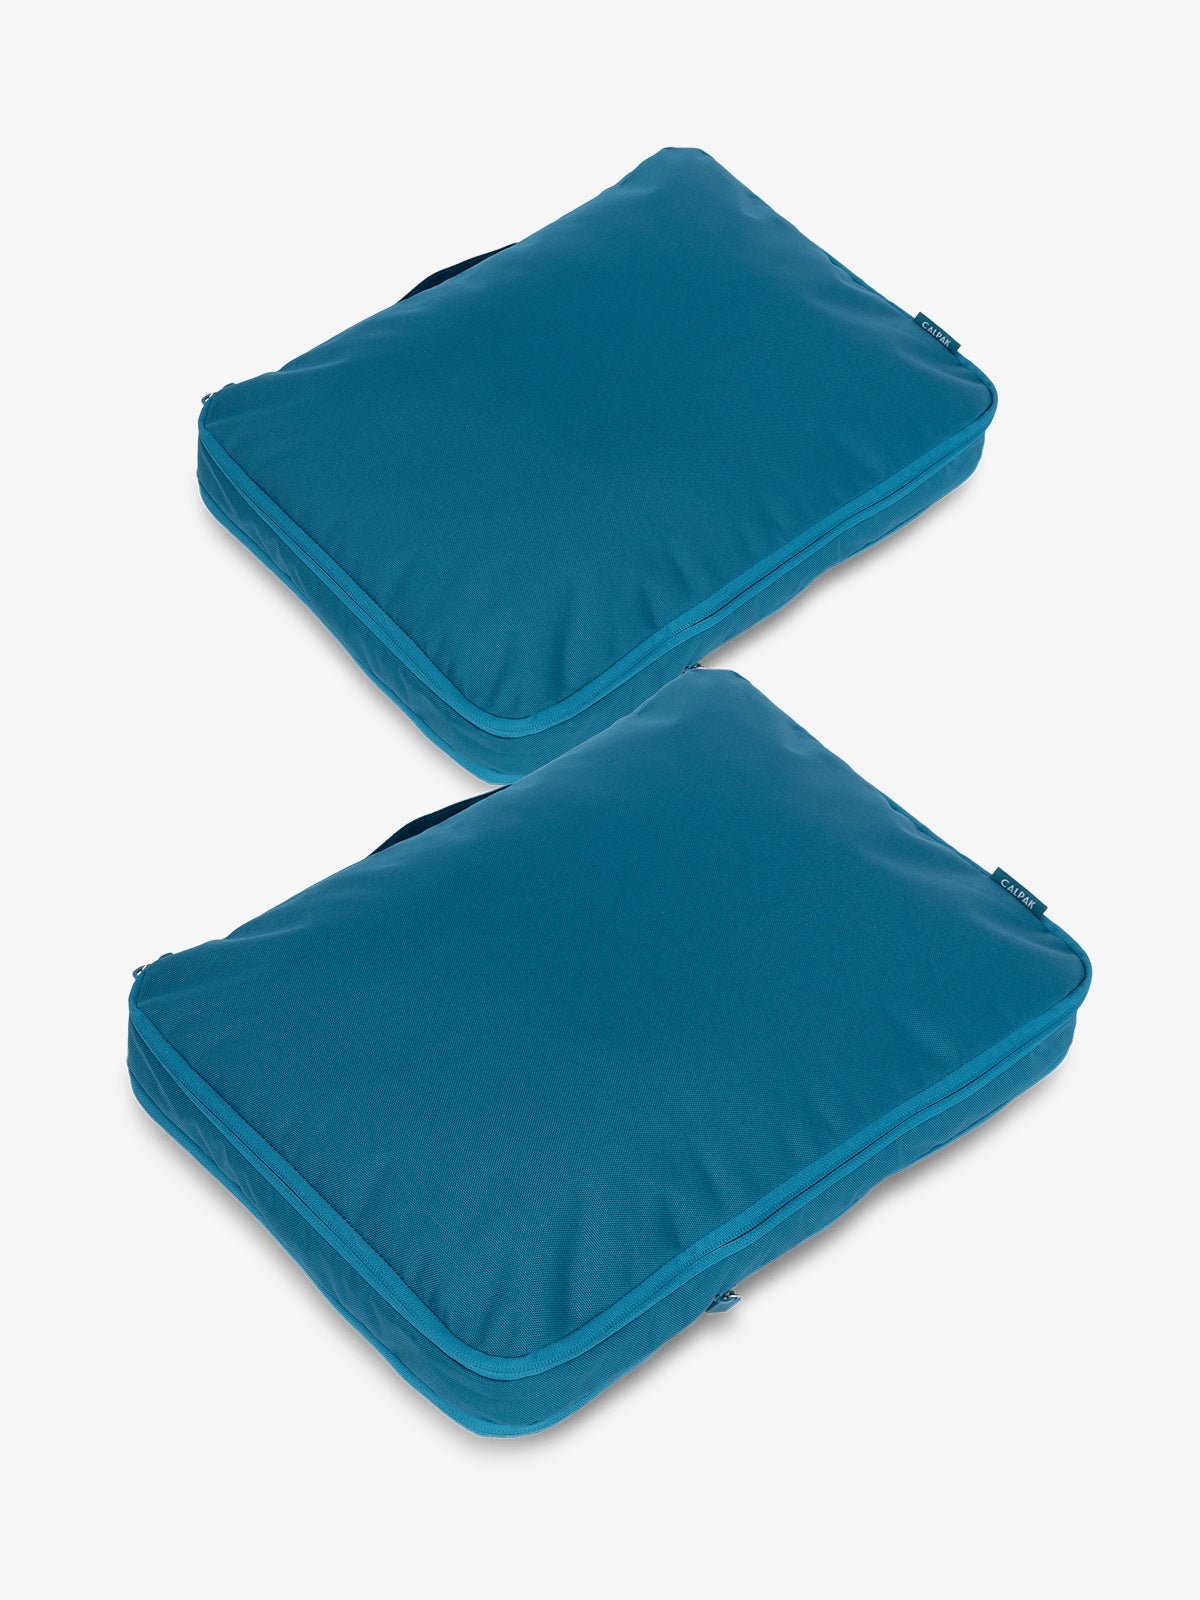 CALPAK large compression packing cubes in lagoon